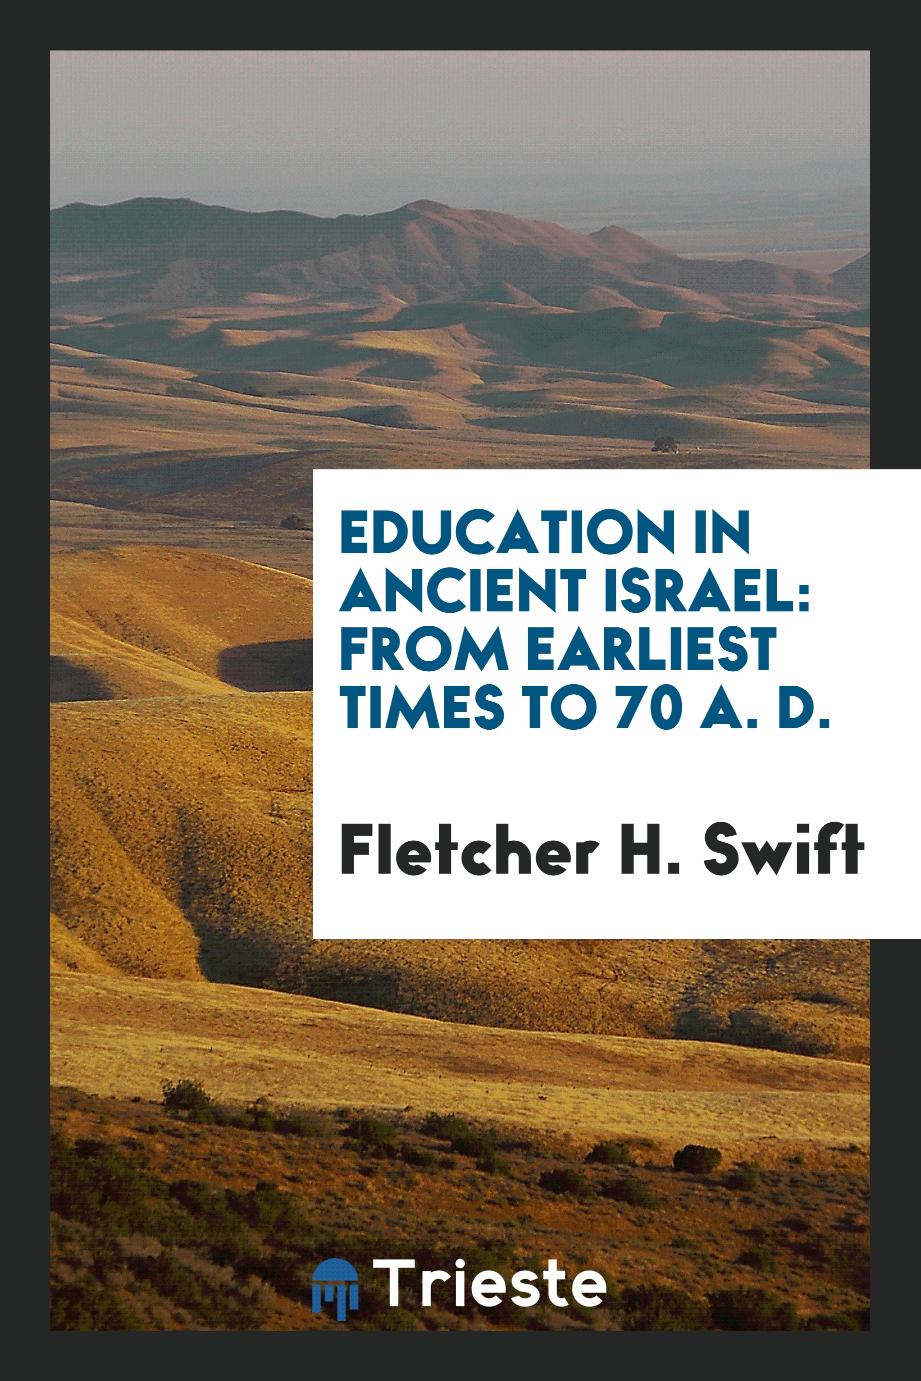 Fletcher H. Swift - Education in Ancient Israel: From Earliest Times to 70 A. D.